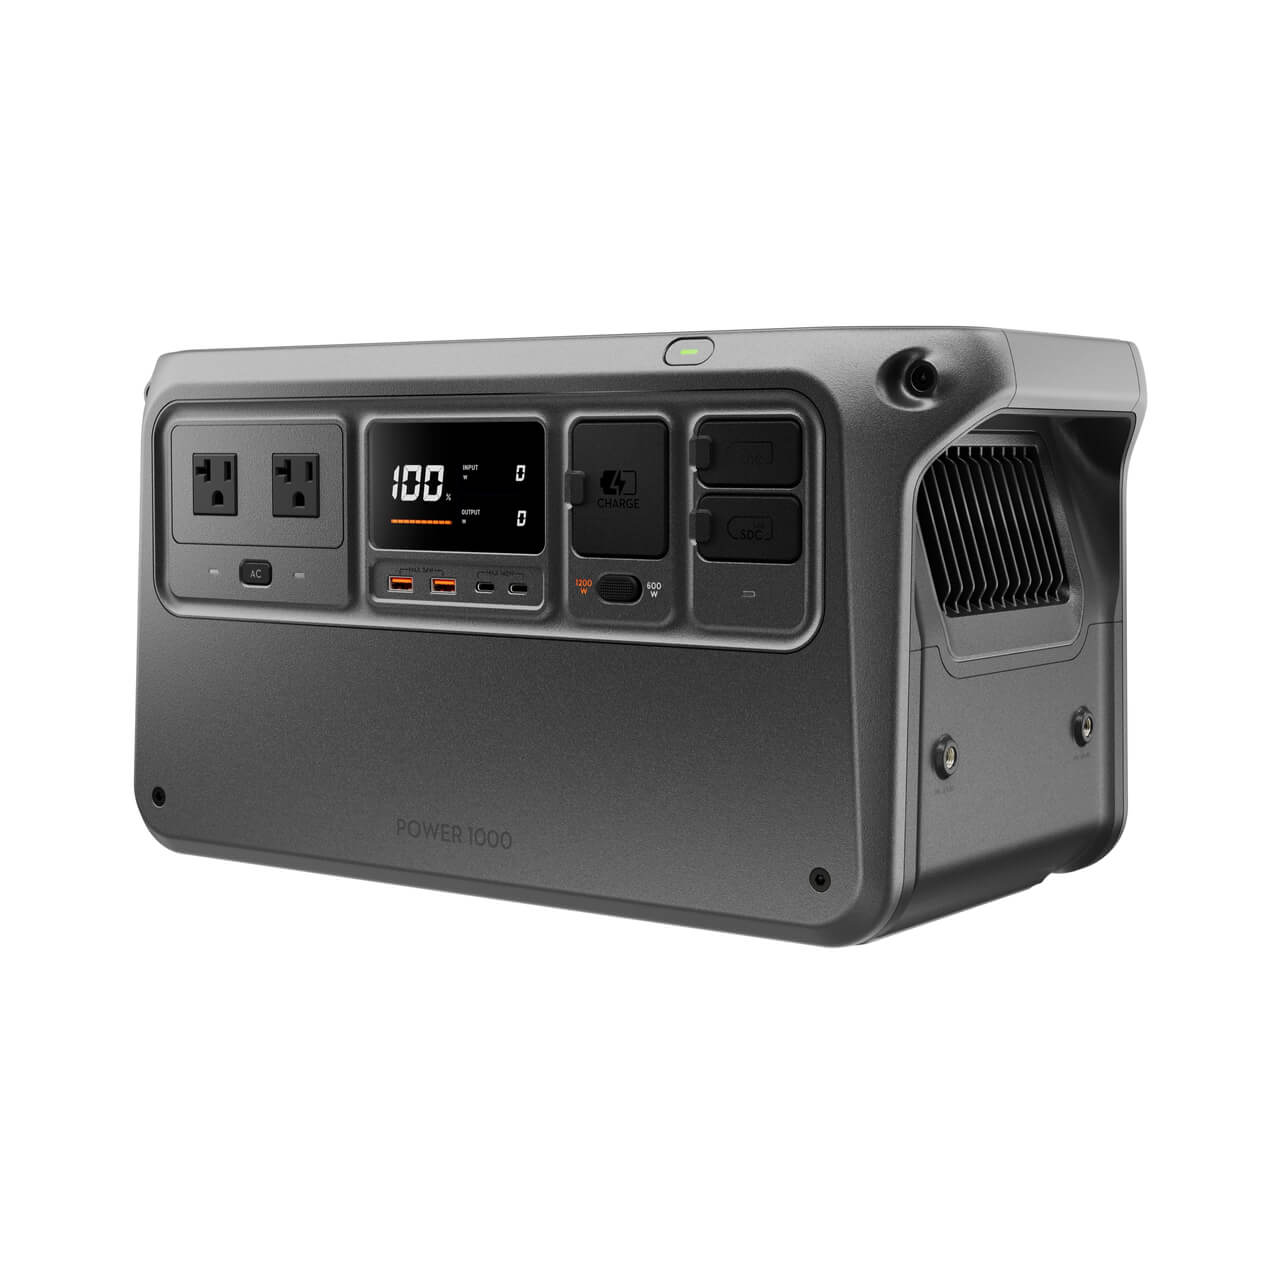 DJI's new Power station that can operate a microwave- DJI POWER 1000 & 500 1